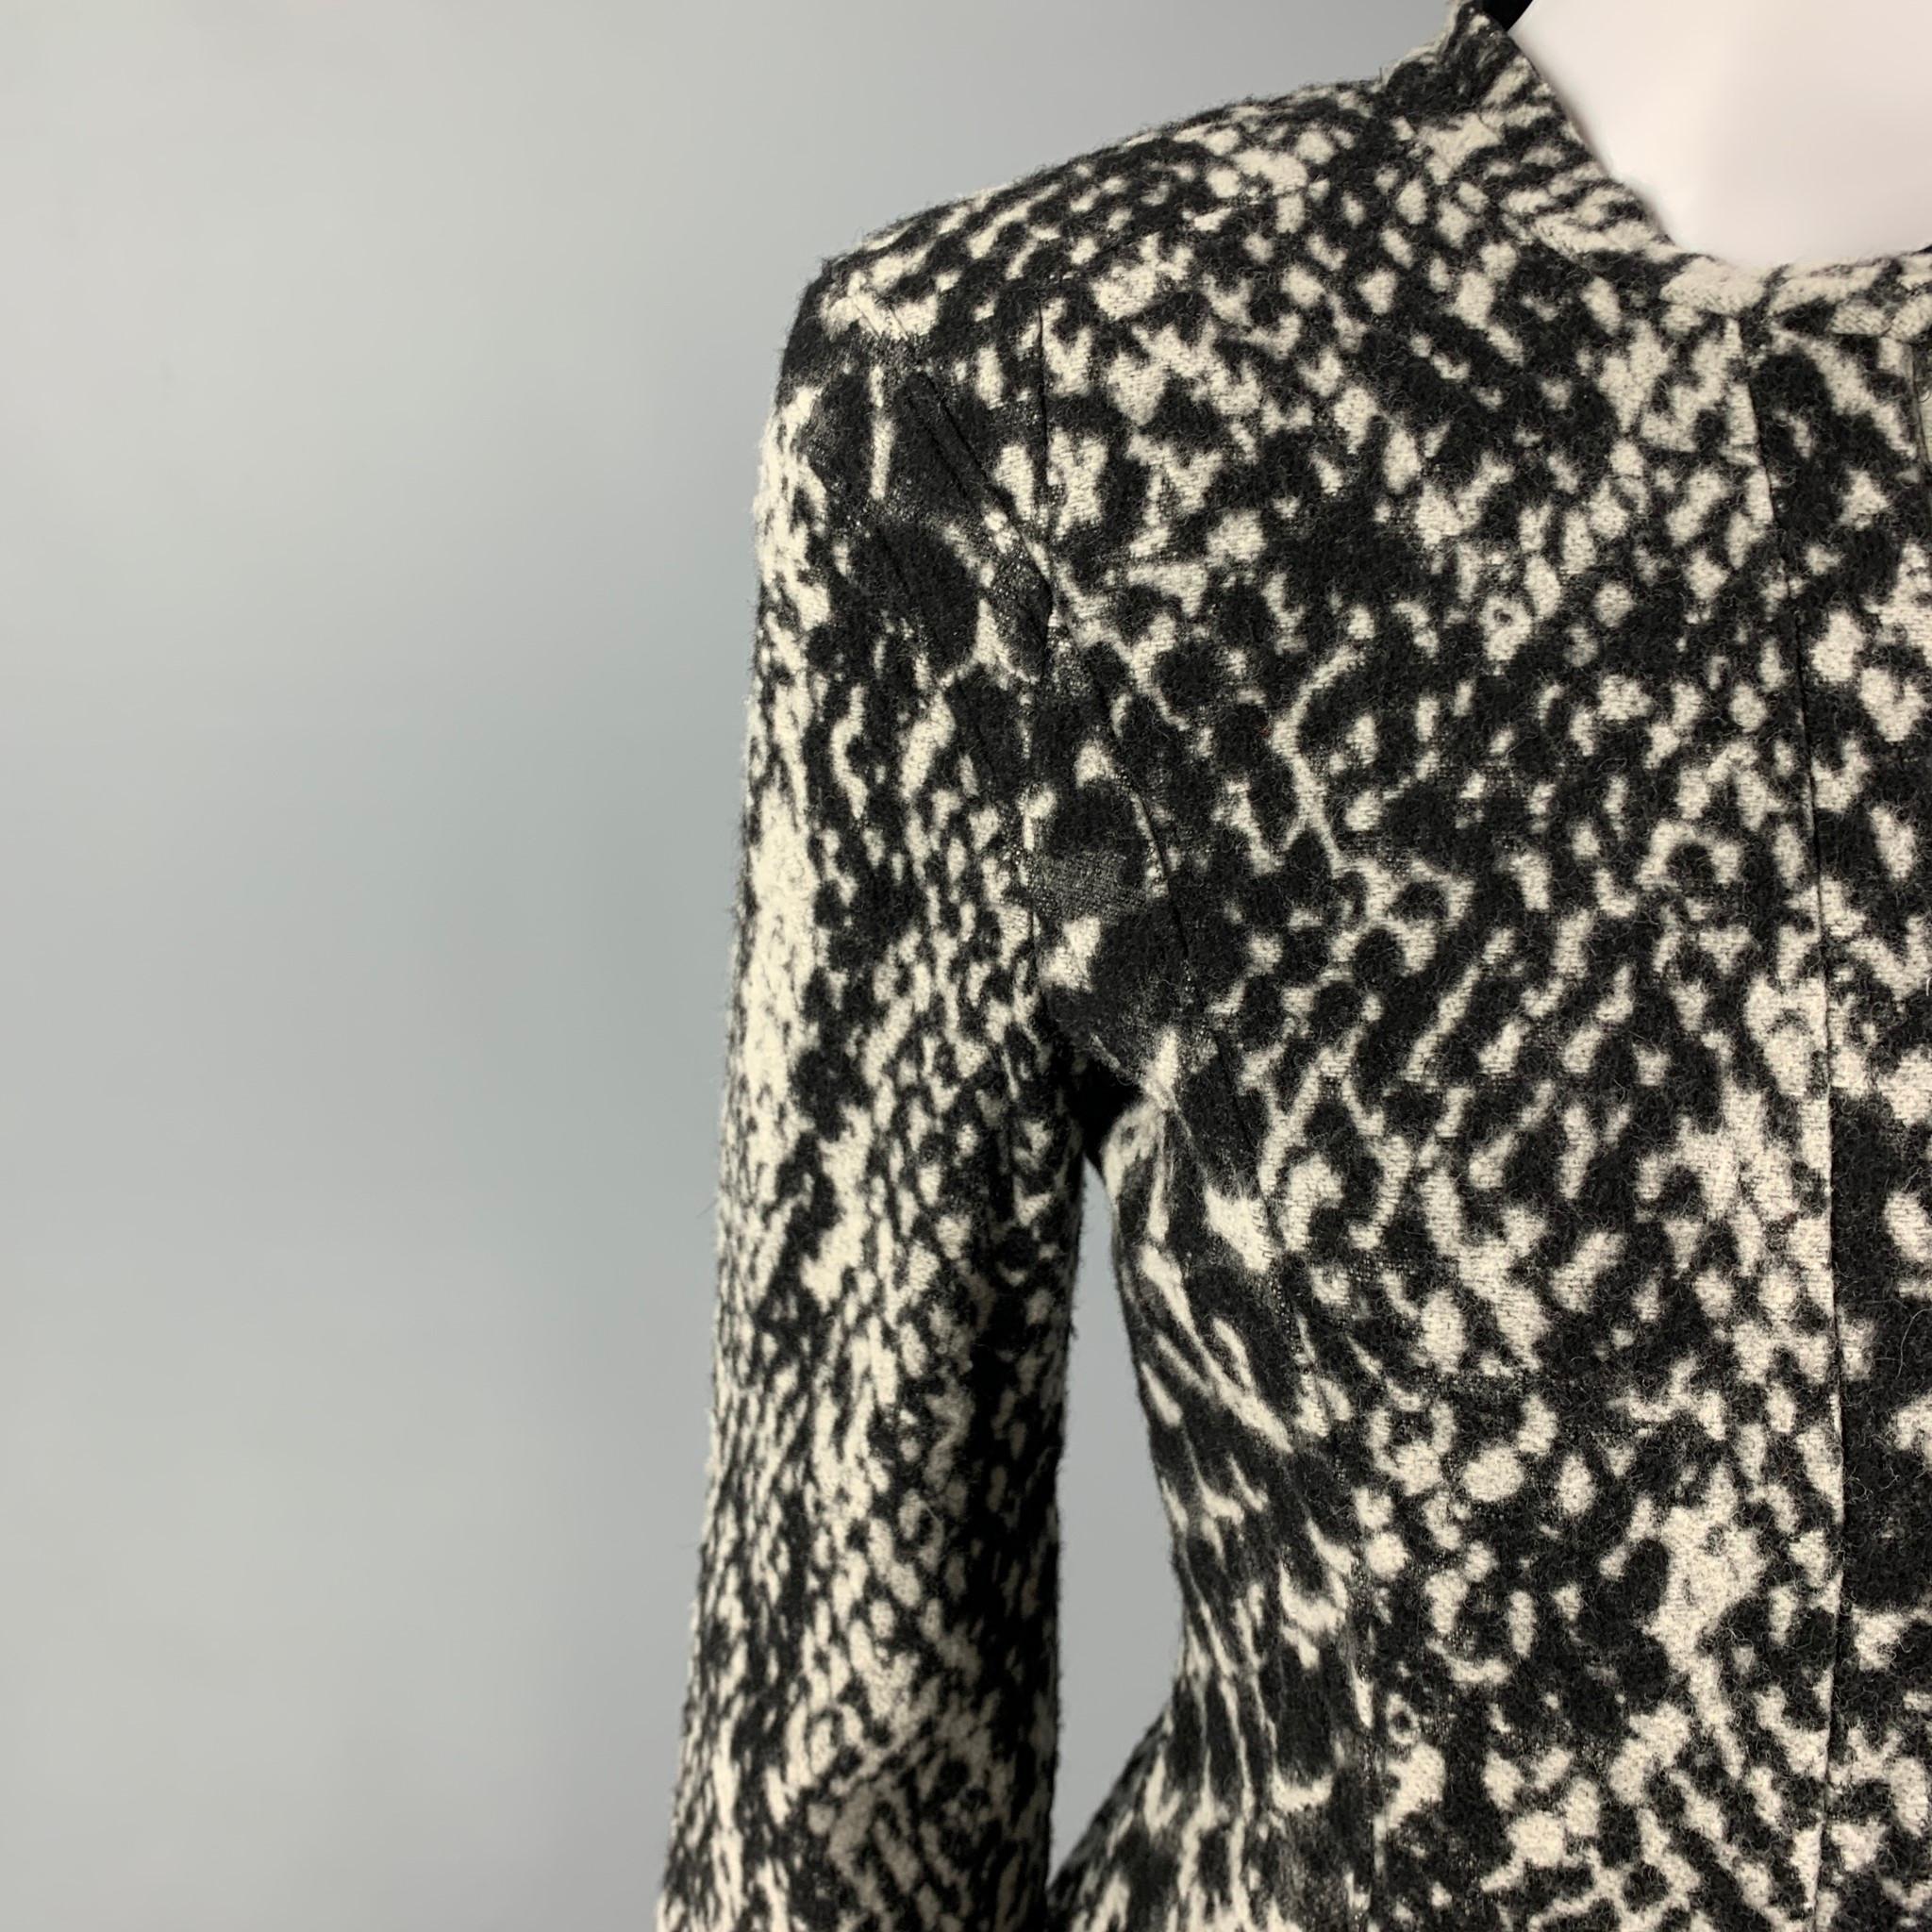 GIORGIO ARMANI jacket comes in a grey & black animal print material featuring a collarless style, strap collar detail, and a hidden zipper closure. Made in Italy. 

Very Good Pre-Owned Condition. Fabric tag removed.
Marked: